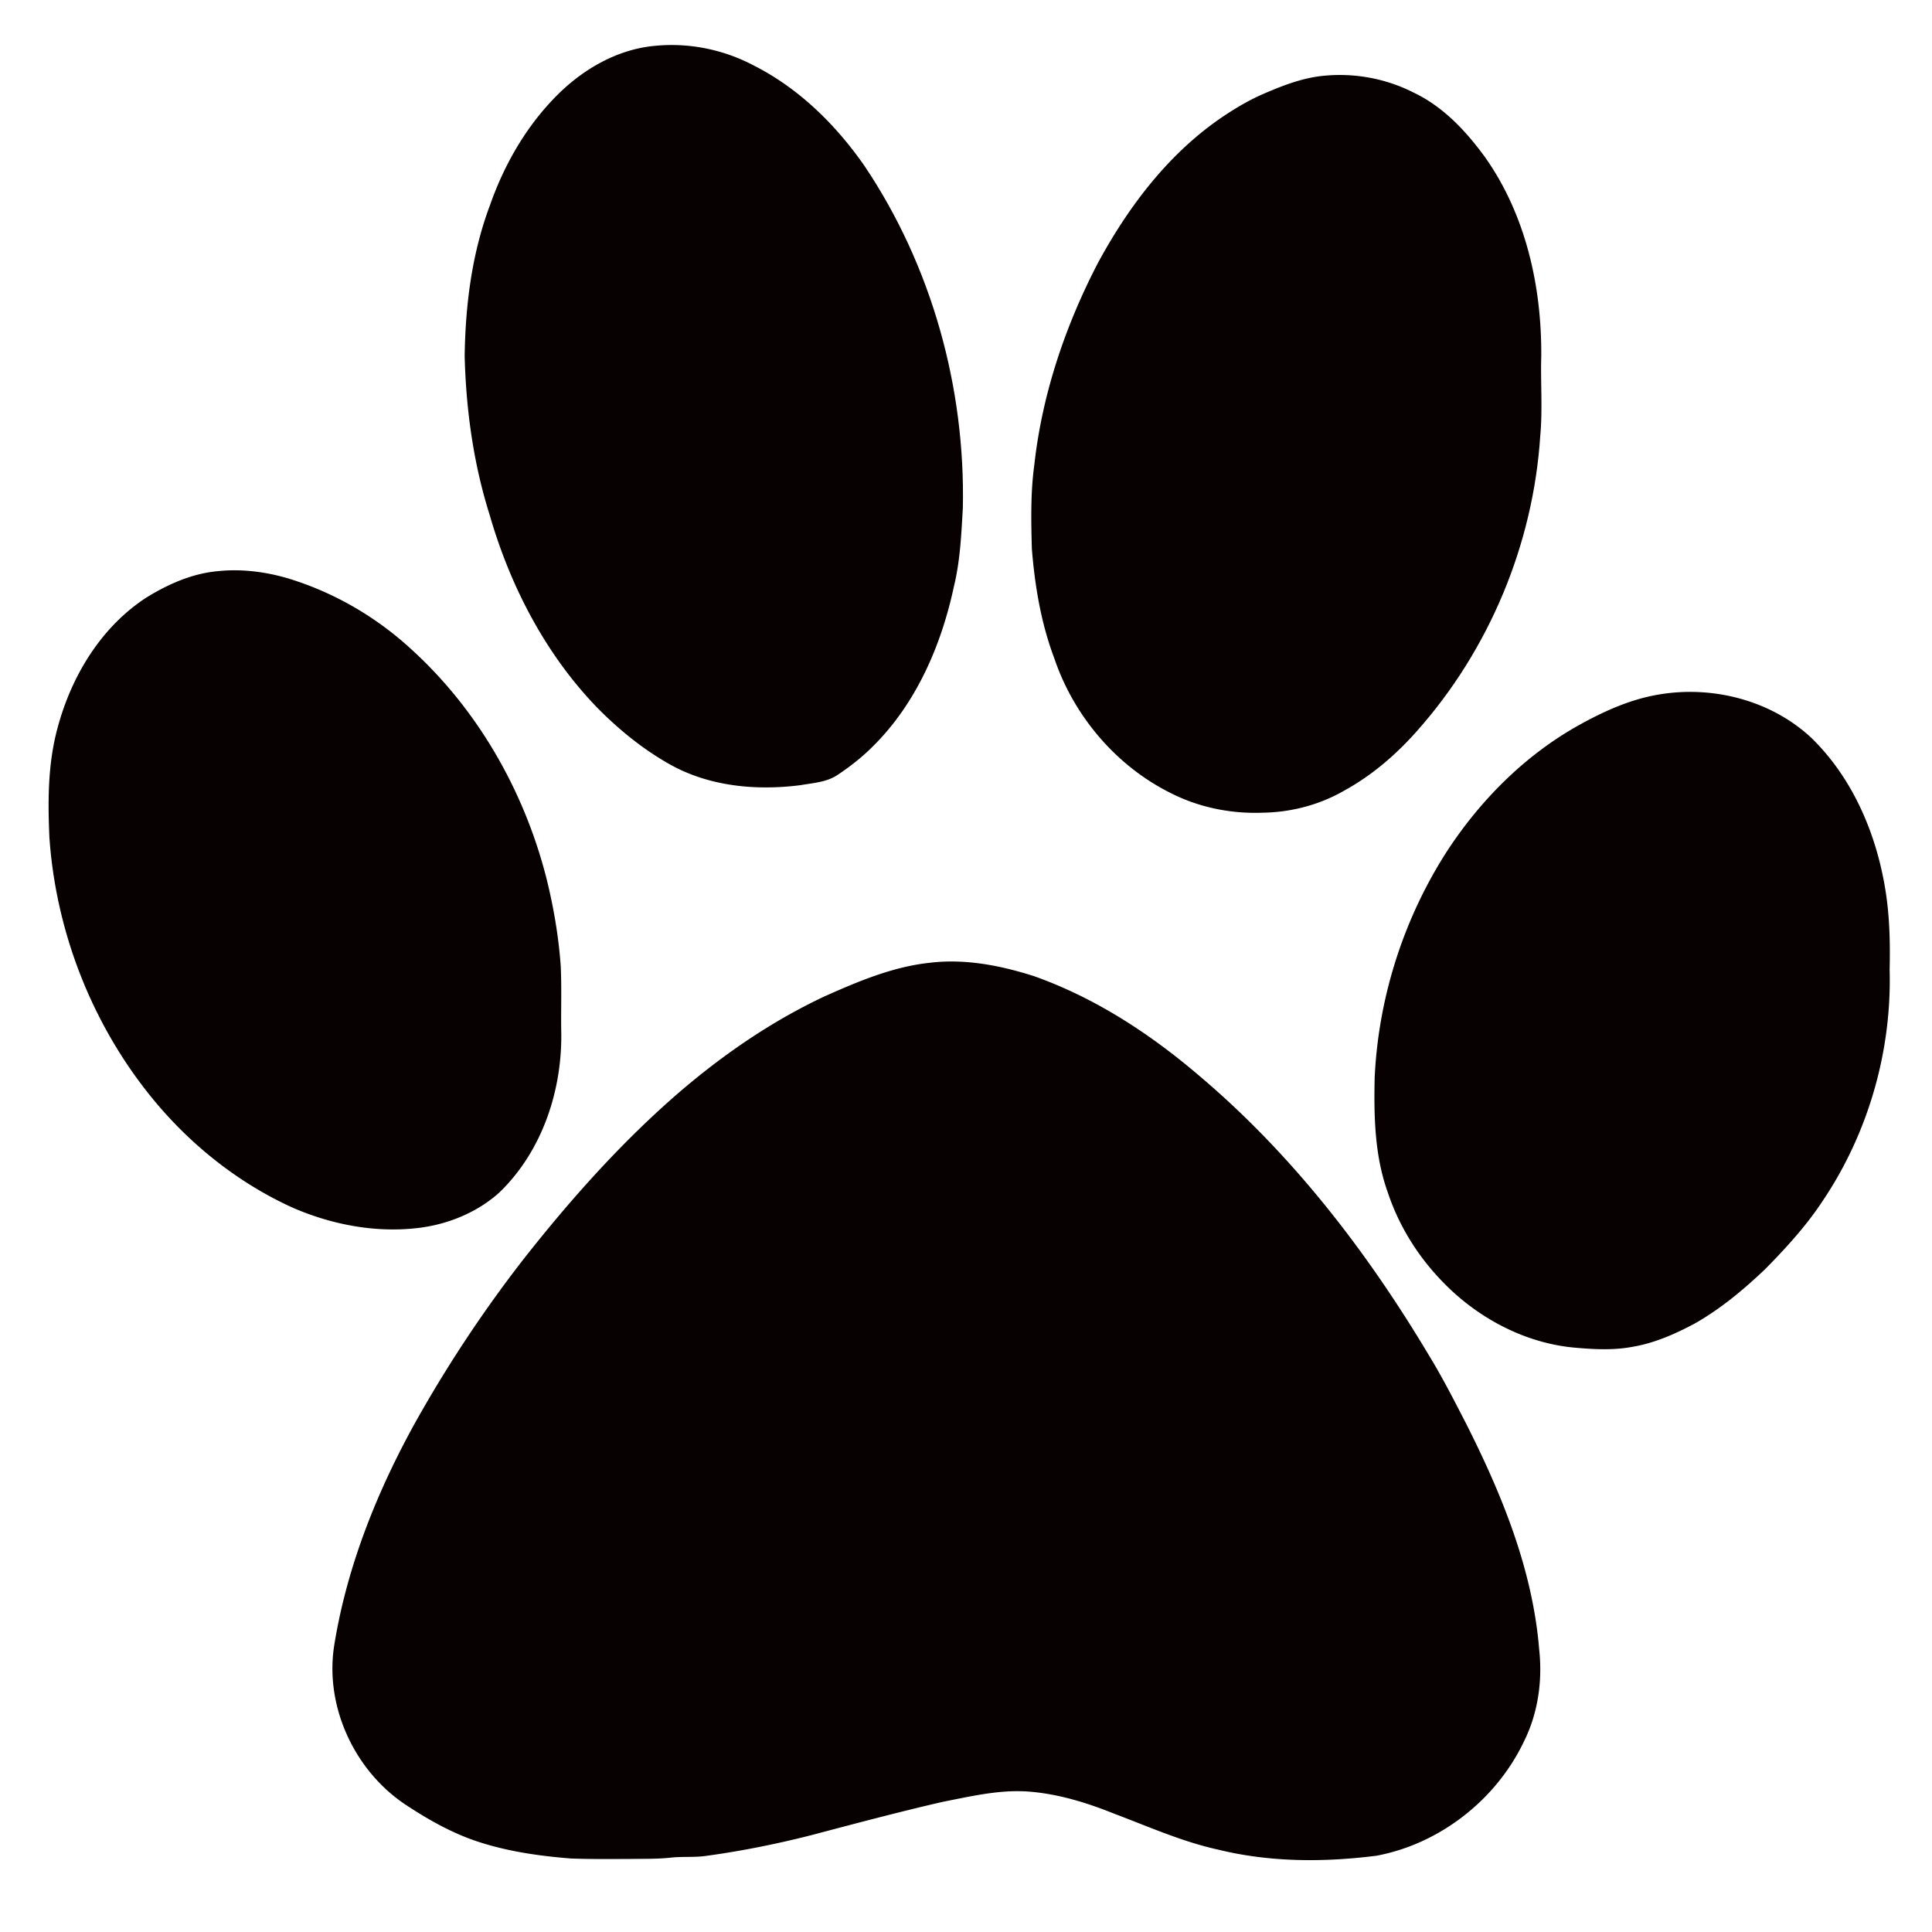 Paw prints heart clipart no background